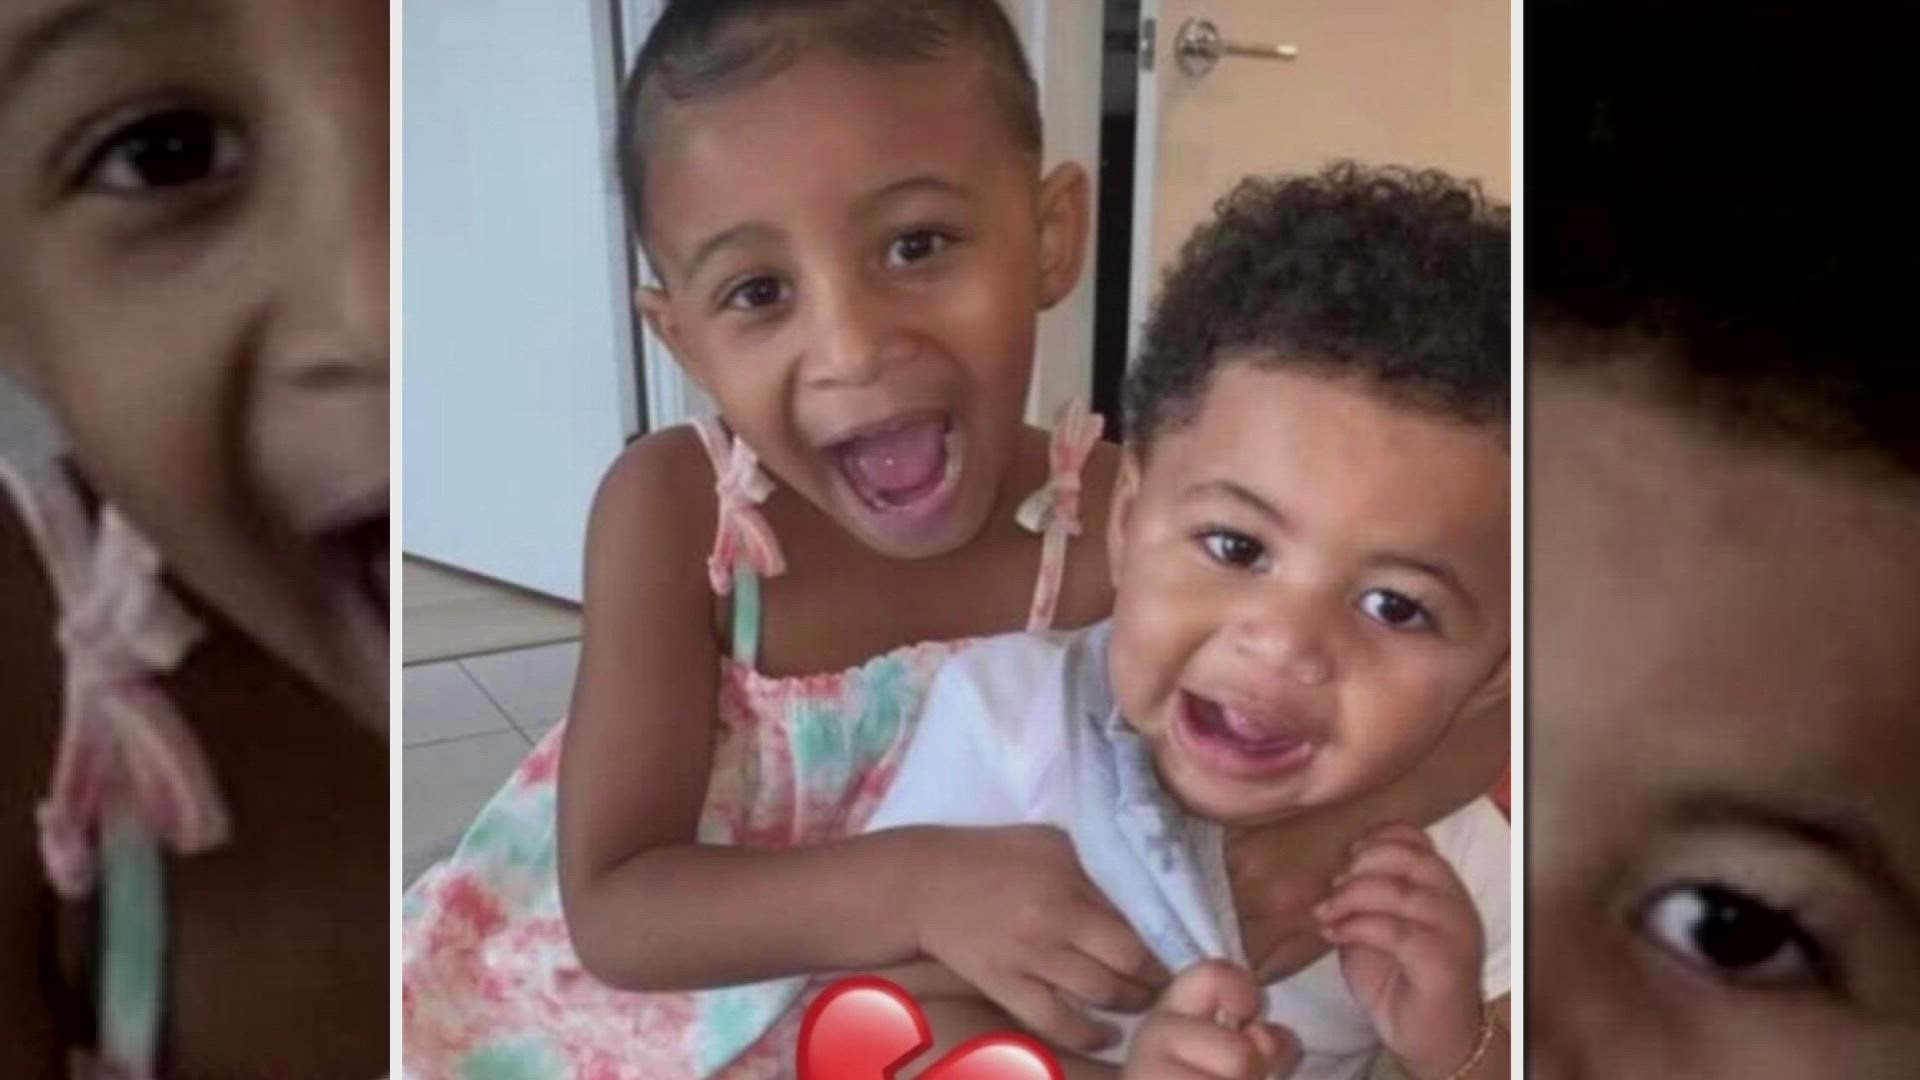 Court records released describe the horrific scene when a father had to break through a window to try and rescue his two children.